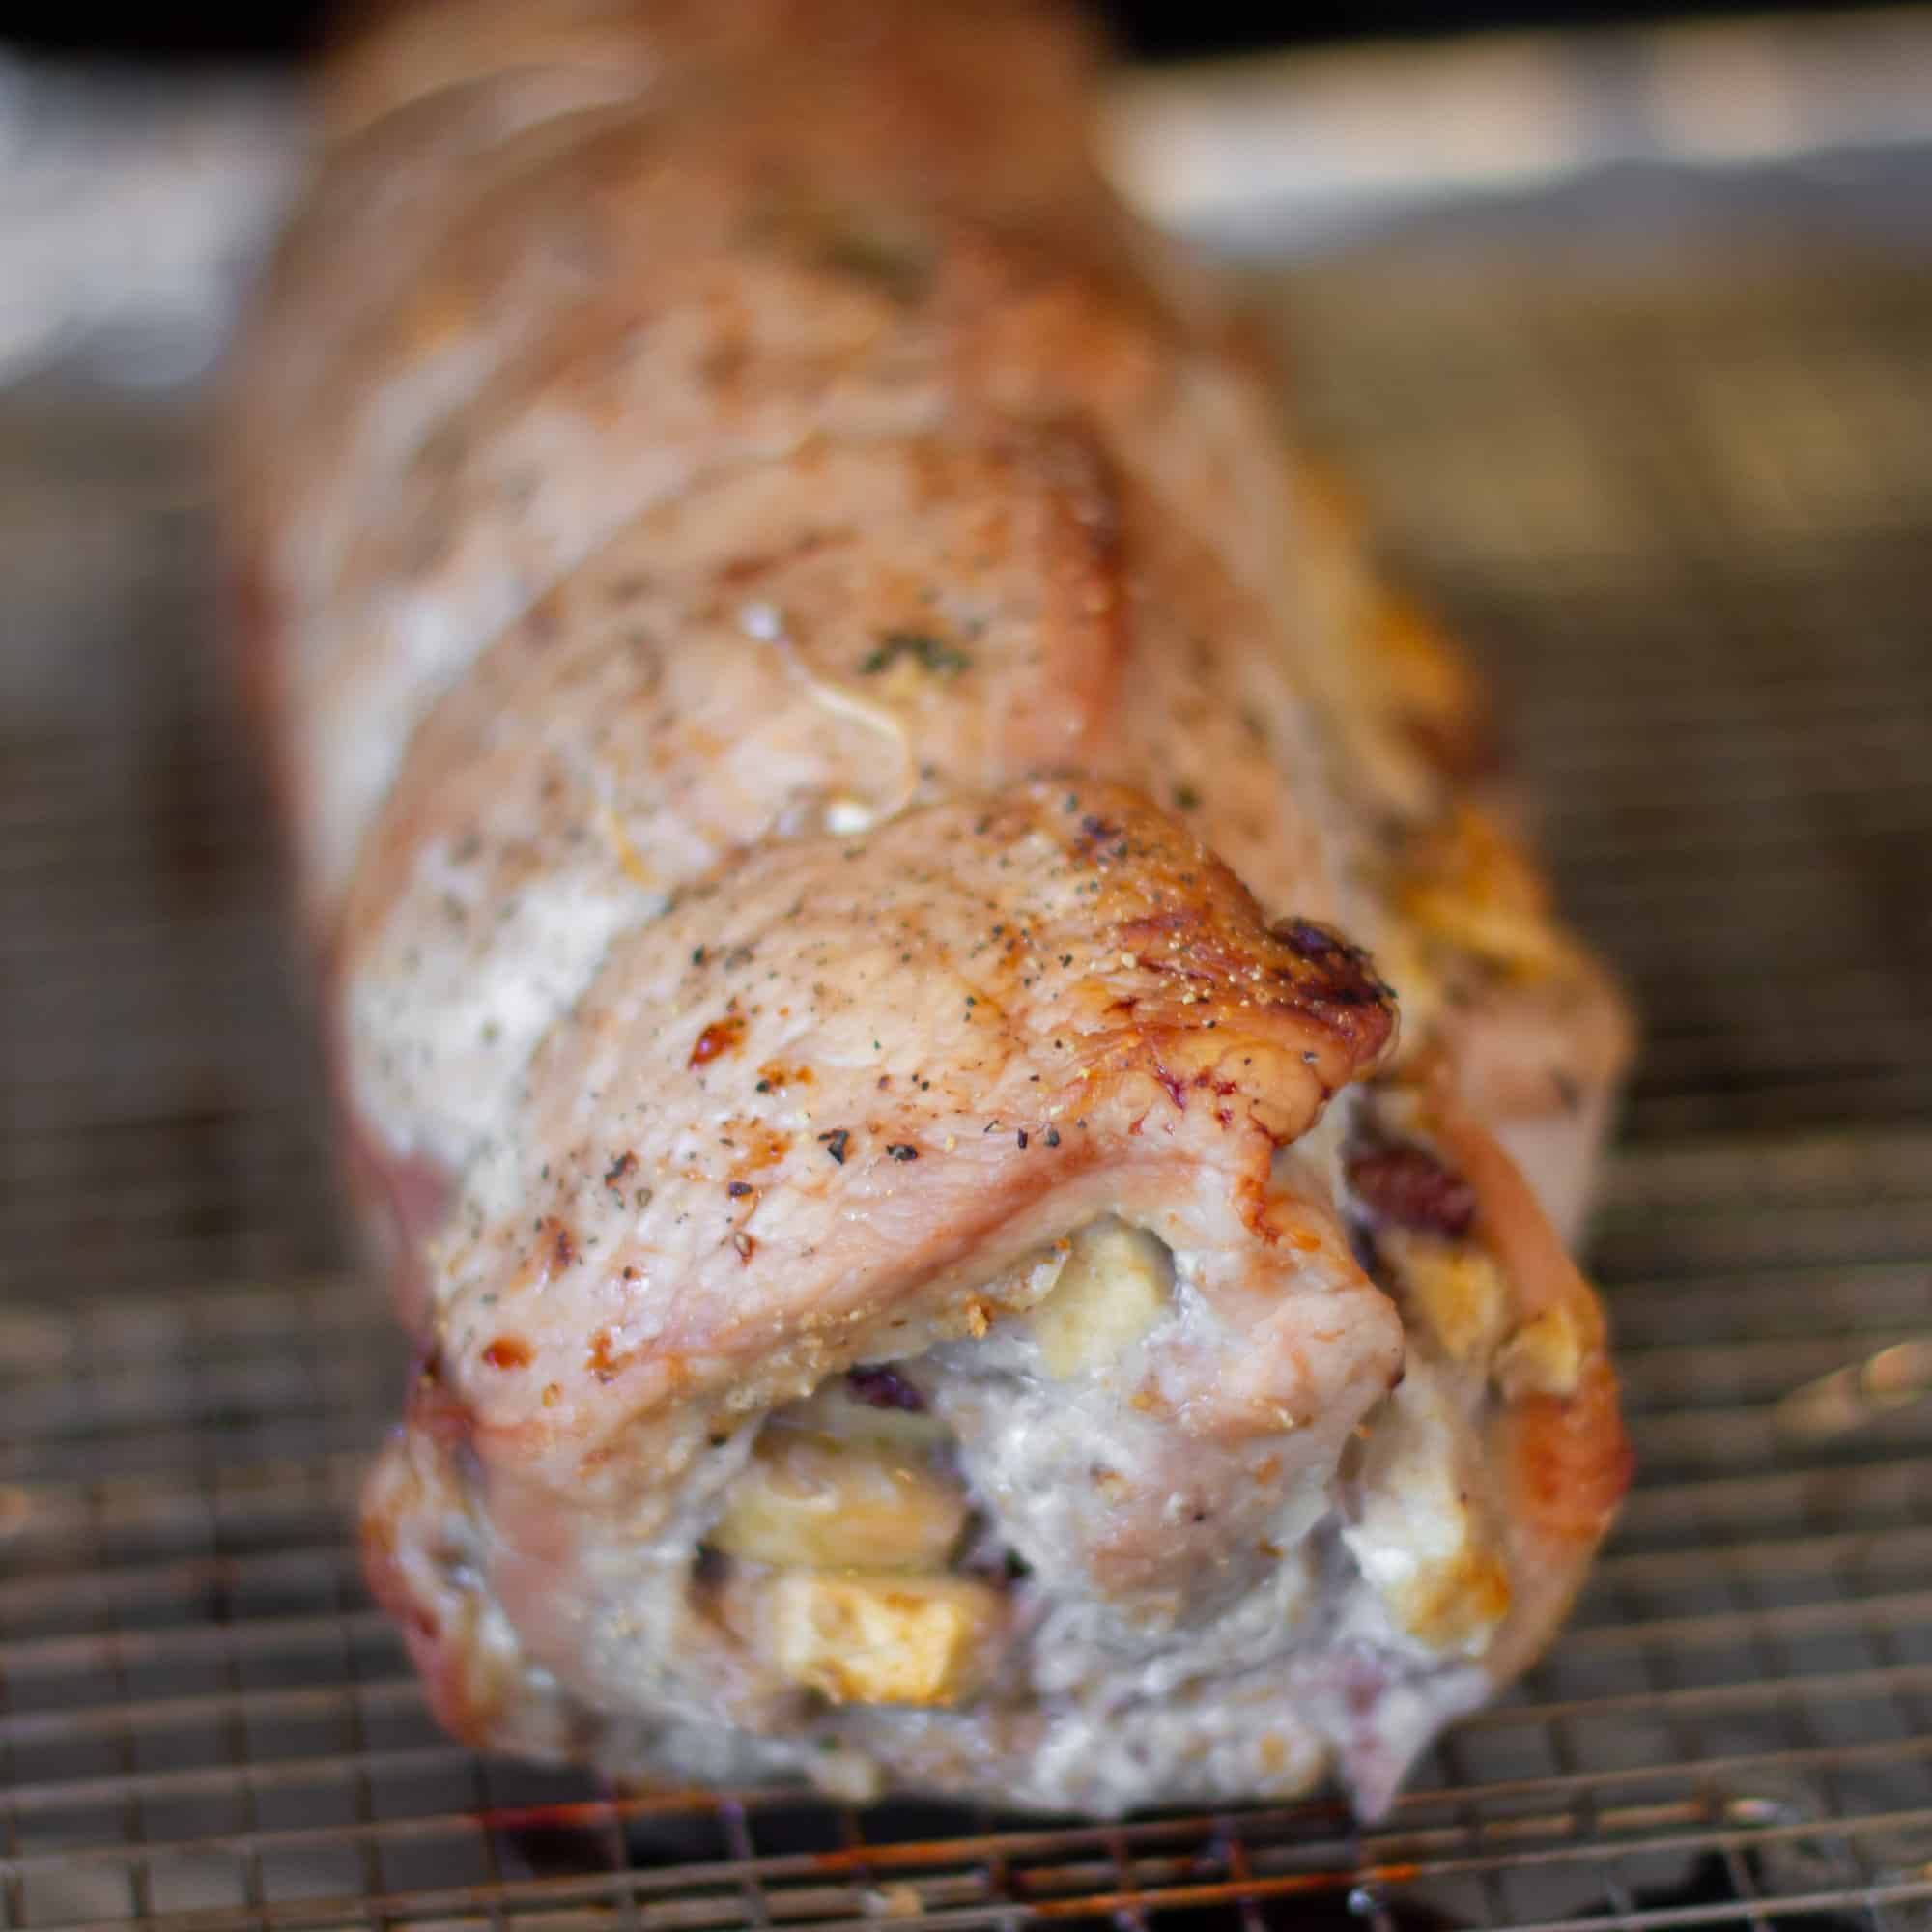 Here is the finished roasted stuffed pork loin.